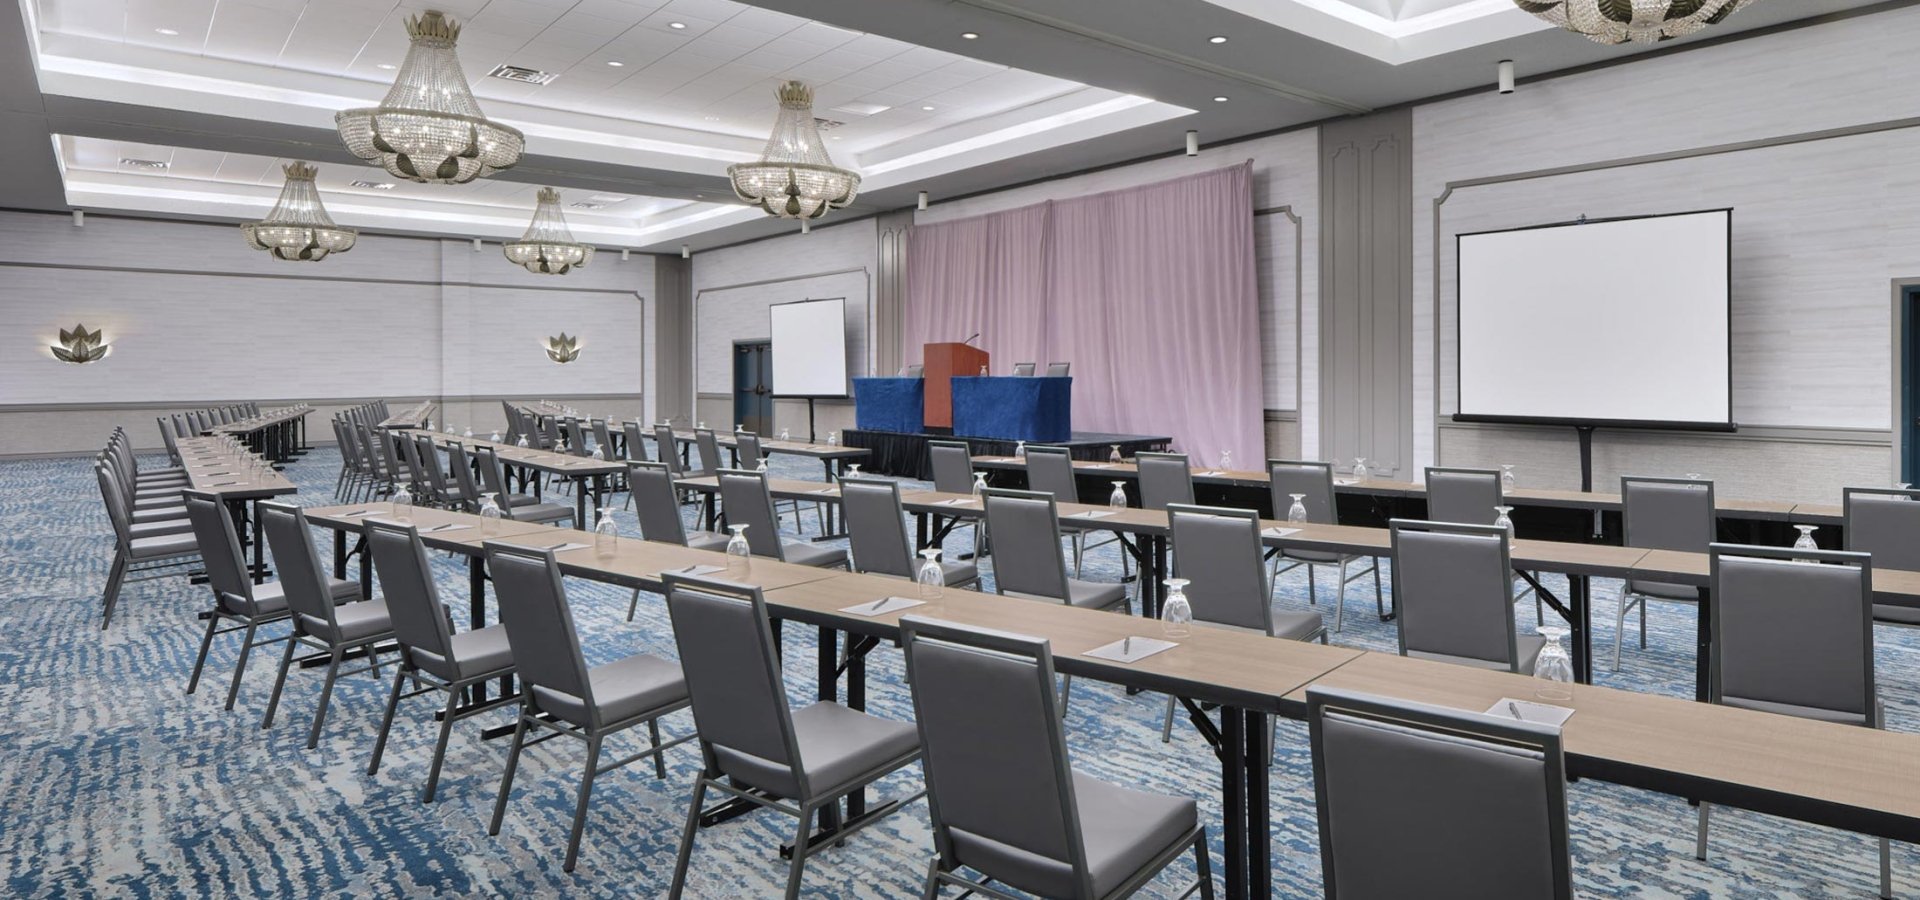 Windsor Ballroom Classroom & Convention Space in Myrtle Beach